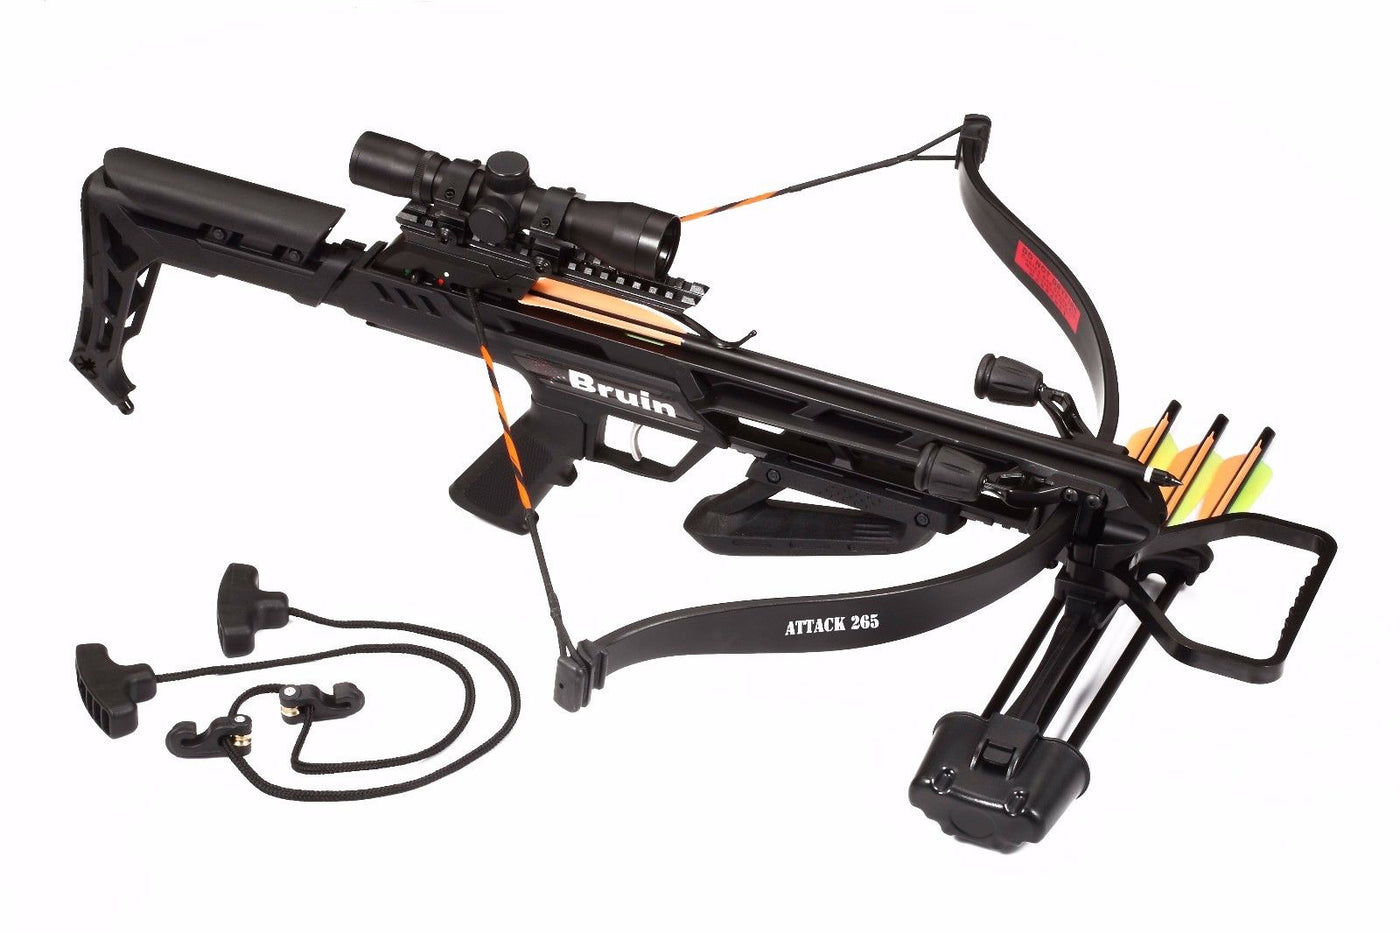 Bruin Attack 265 Recurve Crossbow Package - Black